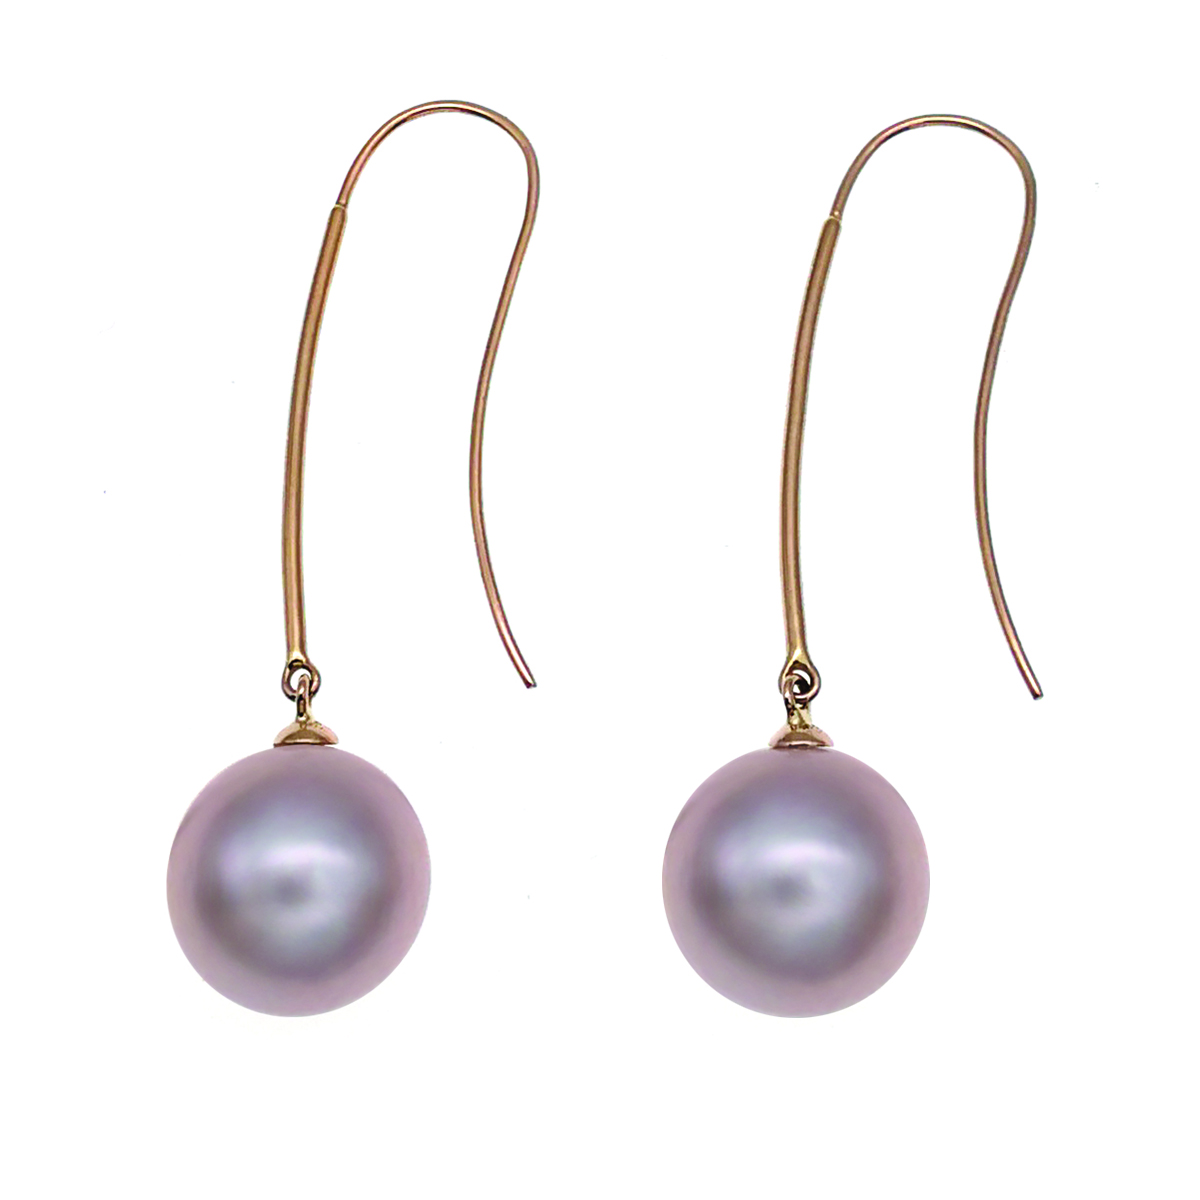 11-12mm Freshwater Pearl with 14K/585 Rose Gold Earring